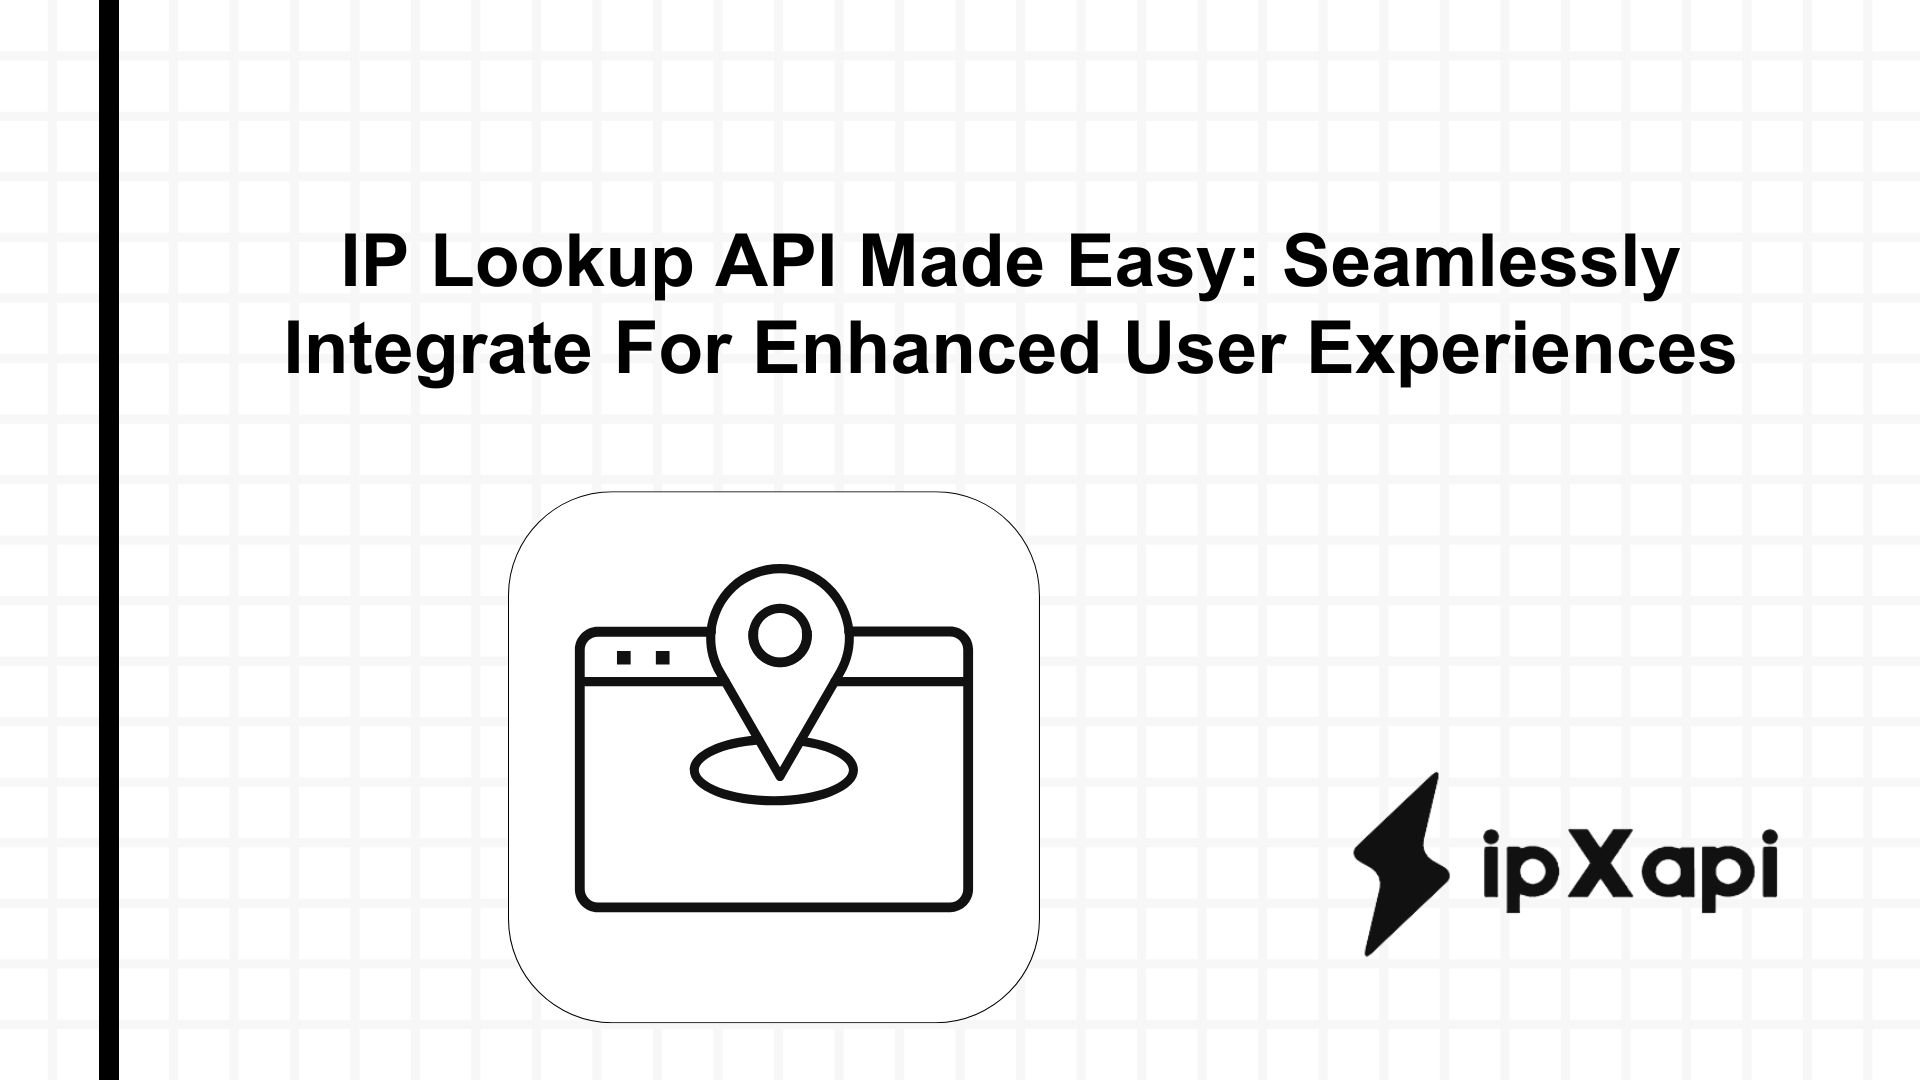 IP Lookup API Made Easy: Seamlessly Integrate For Enhanced User Experiences